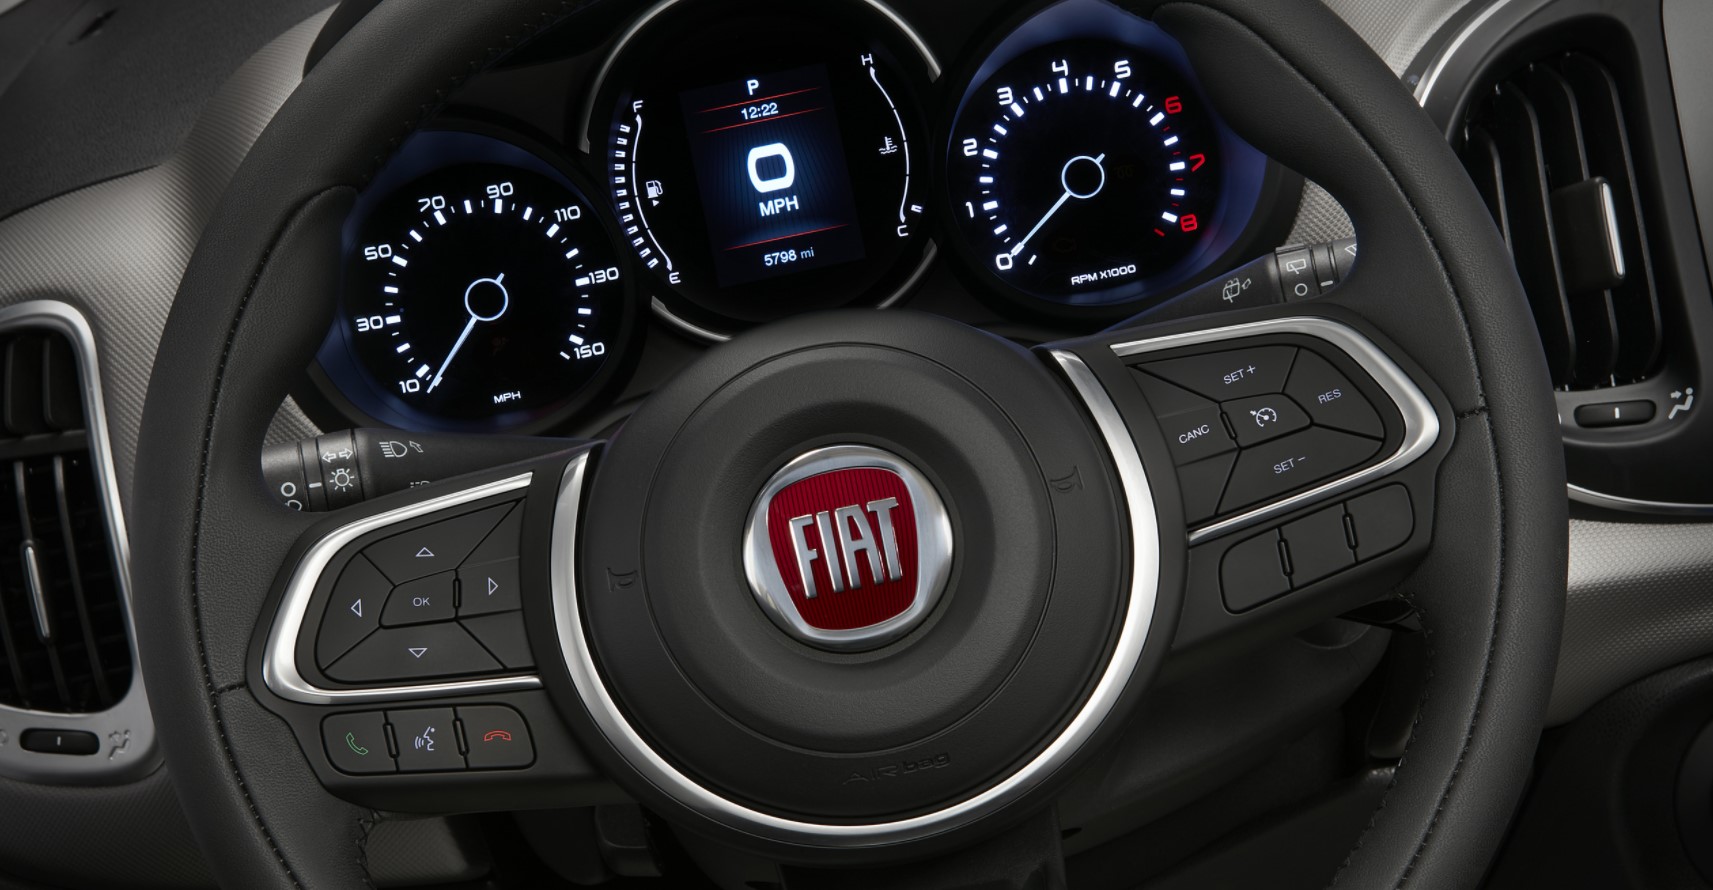 Fiat extended warranty - JR Auto Protect